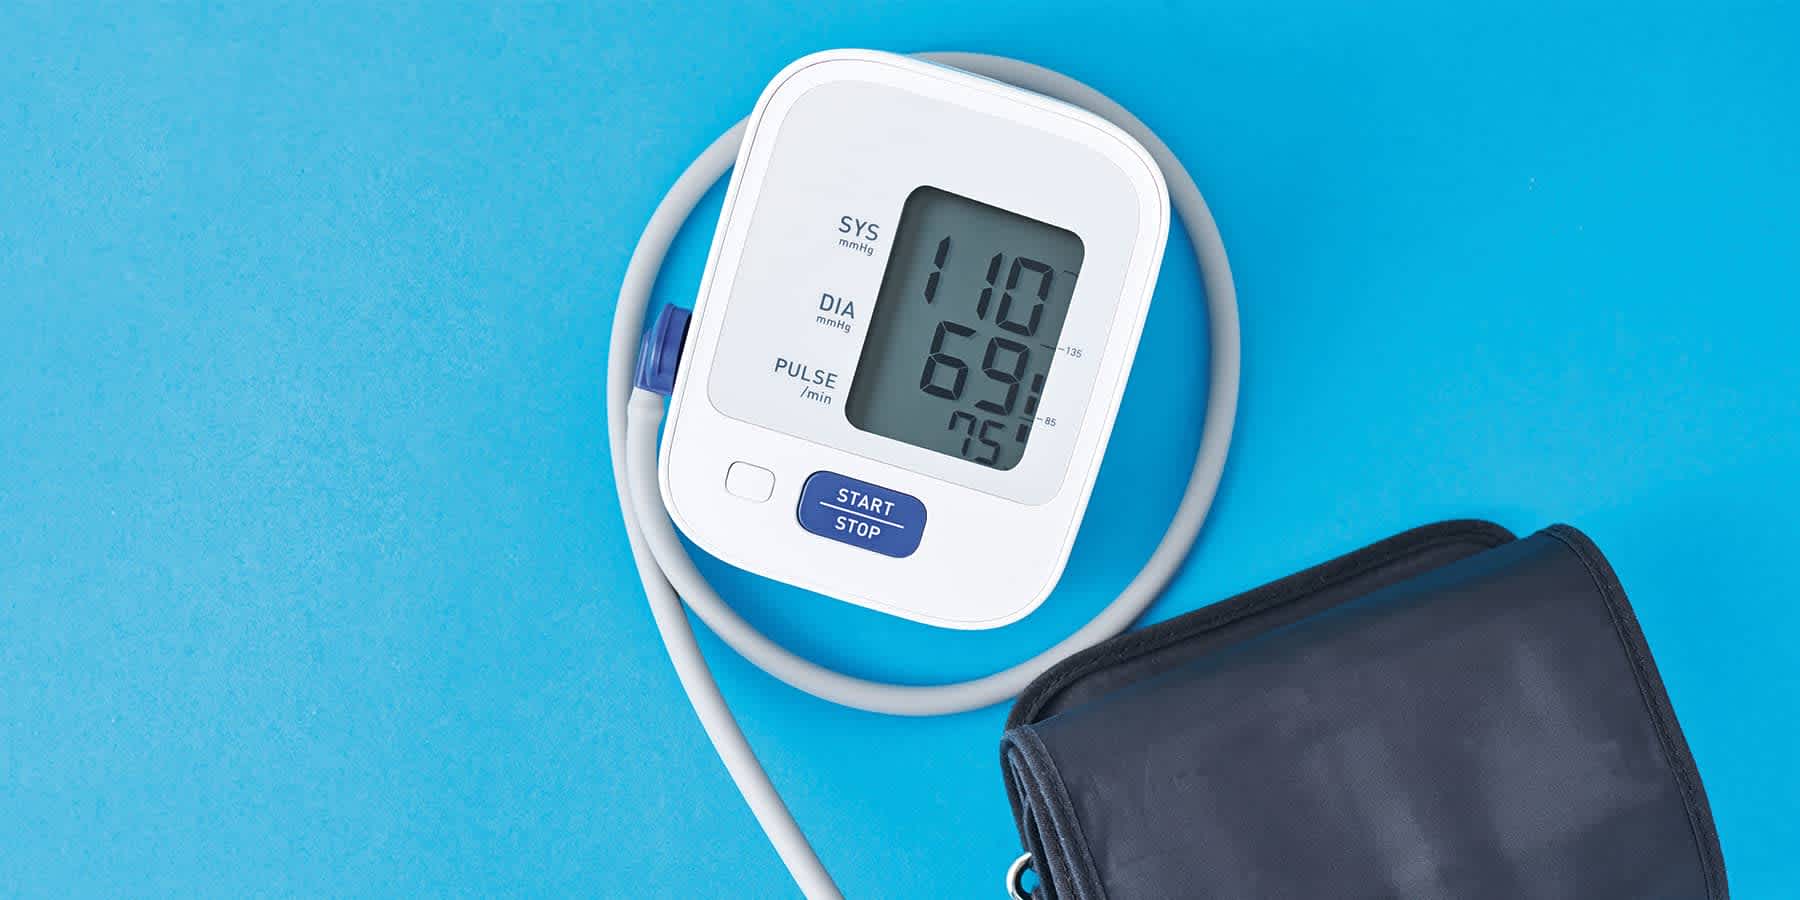 Blood pressure monitor against blue background to help with heart disease management